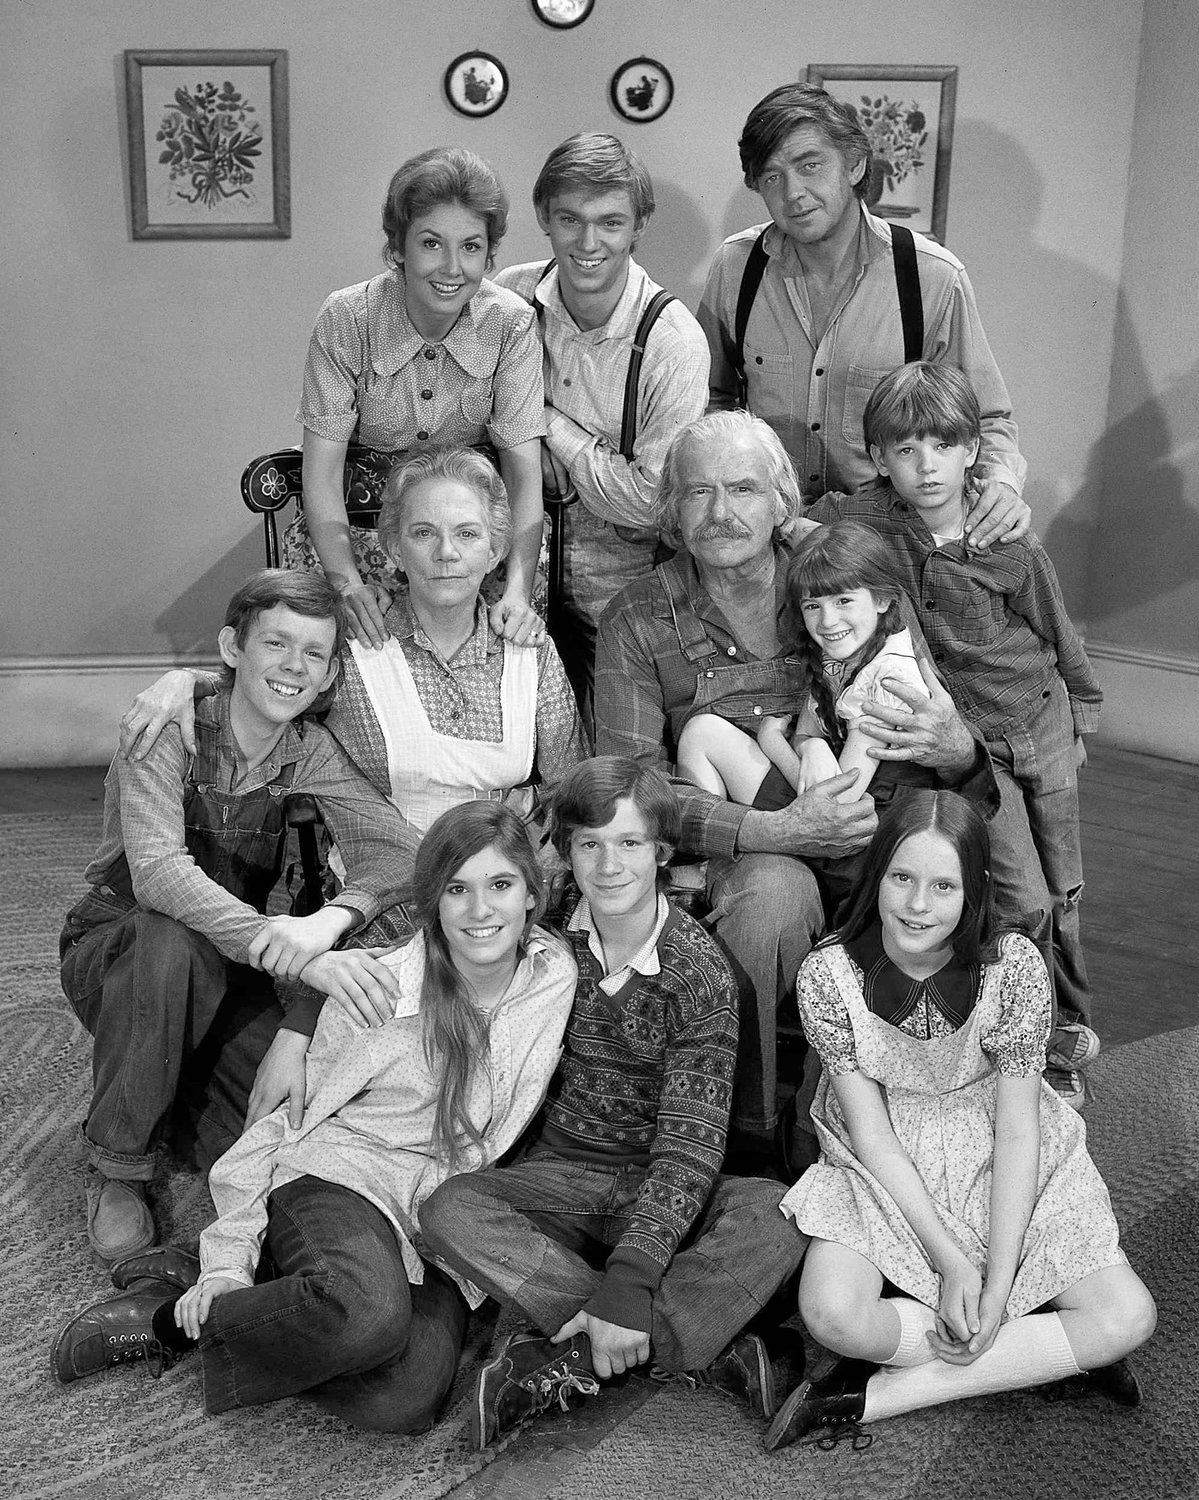 This photo provided by CBS in September 2022 shows actors in the television series “The Waltons.” Bottom row from left are Judy Norton-Taylor, Eric Scott and Mary Elizabeth McDonough. Second row from left are Jon Walmsley, Ellen Corby, Will Geer, Kami Cotler and David W. Harper. Top row from left are Michael Learned, Richard Thomas and Ralph Waite.